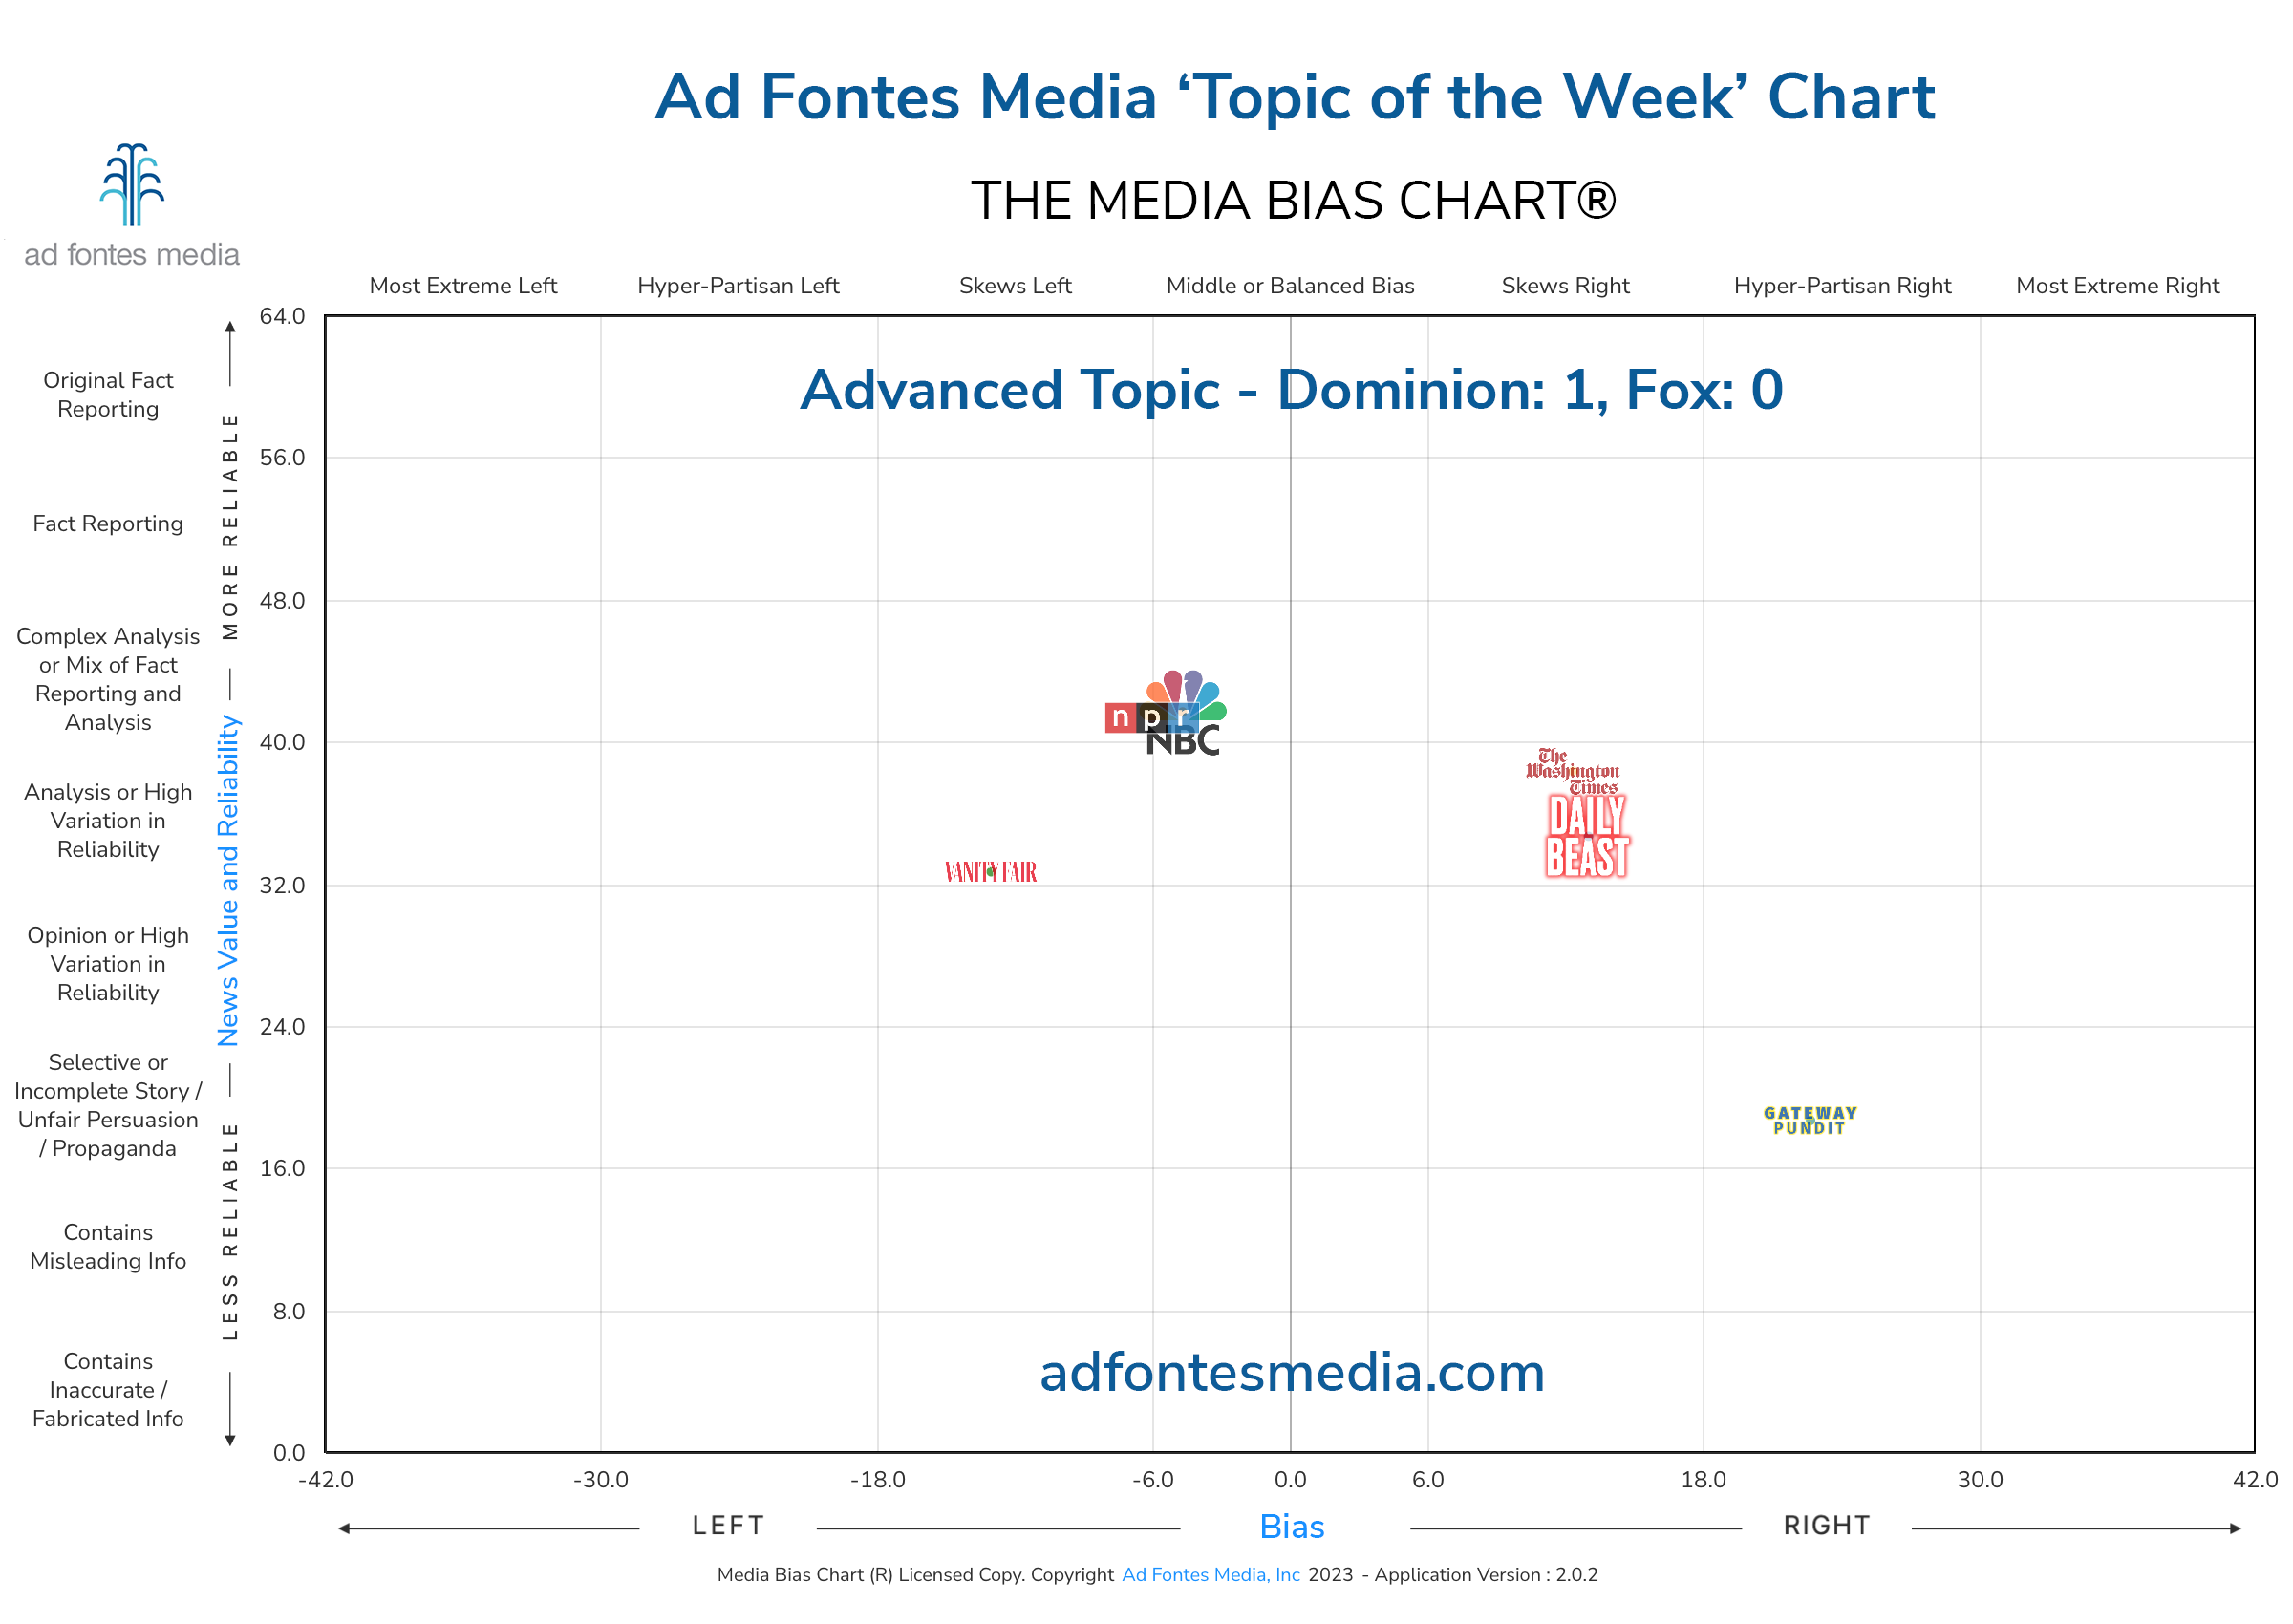 Scores of the Dominion: 1, Fox: 0 articles on the chart